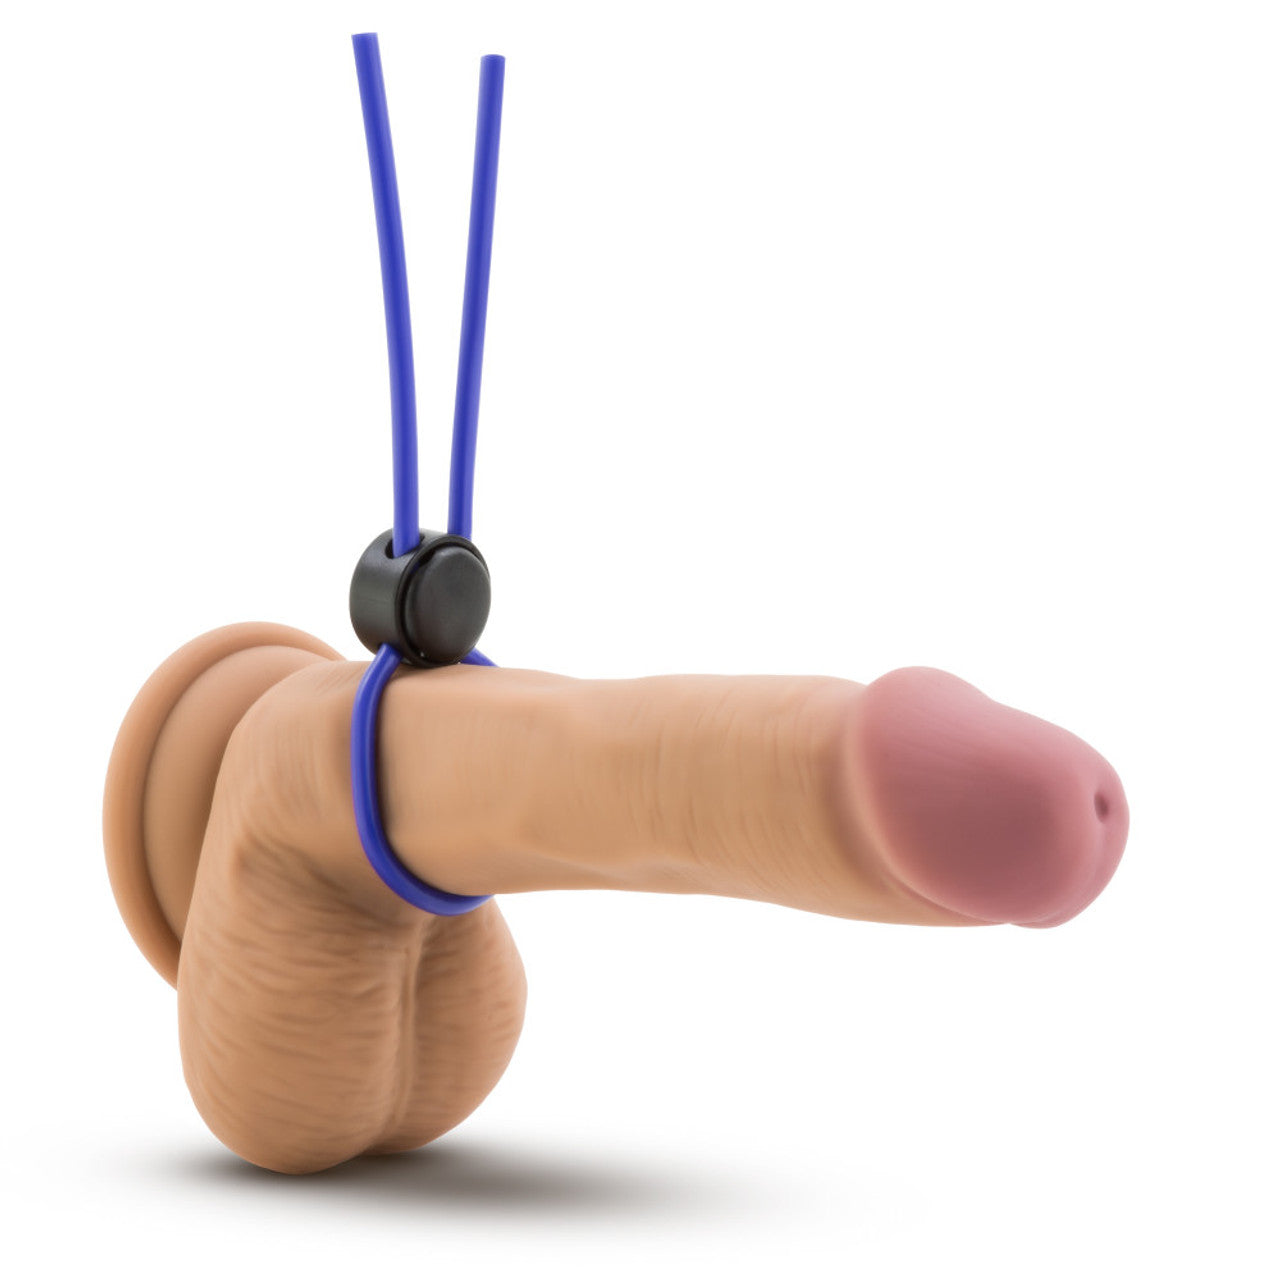 Stay Hard Silicone Loop Cock Ring - Blue